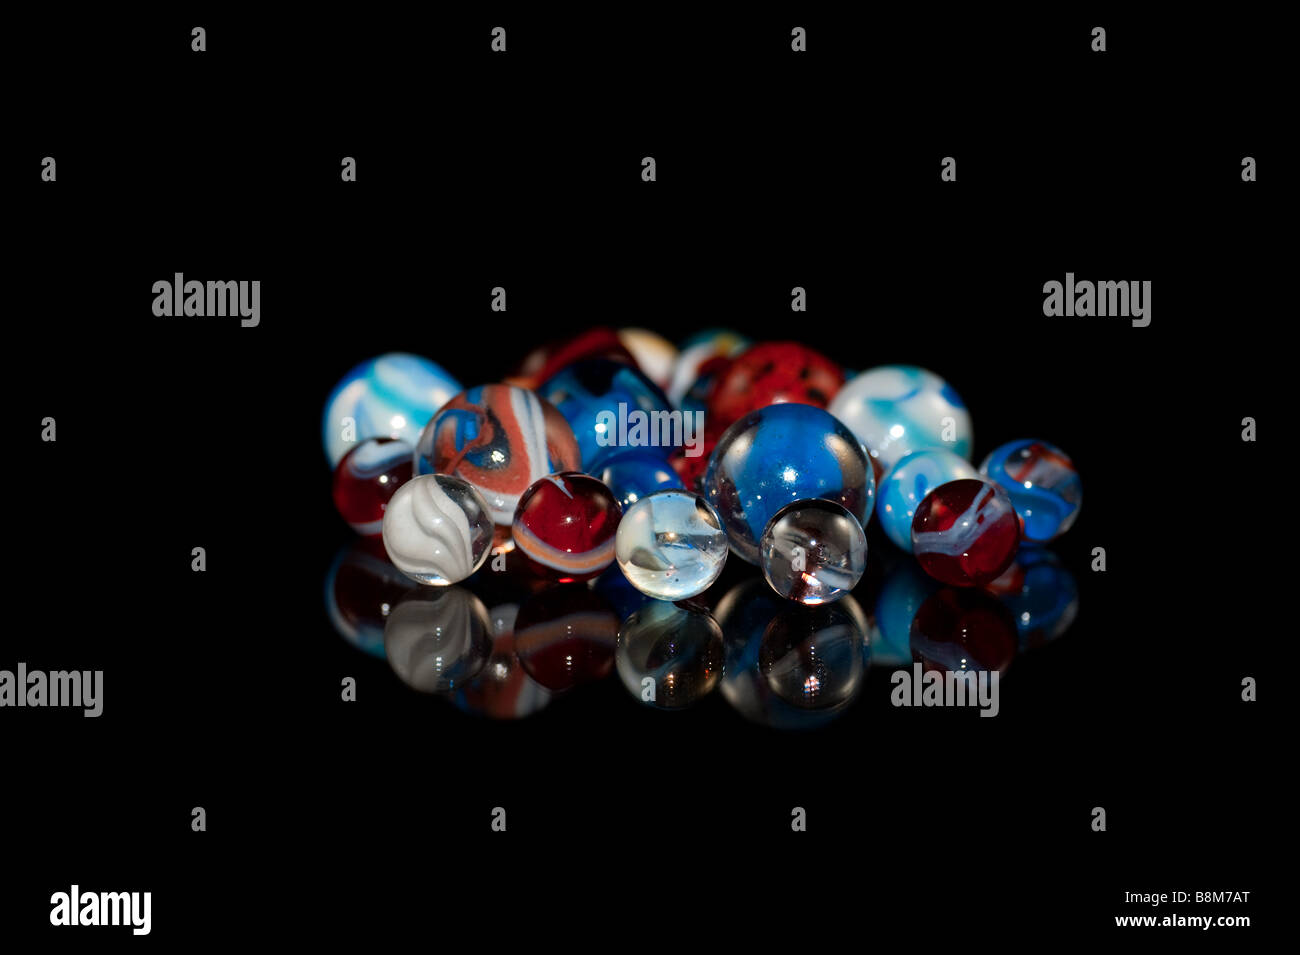 Group of marbles made of glass with swirls and various colors Stock Photo